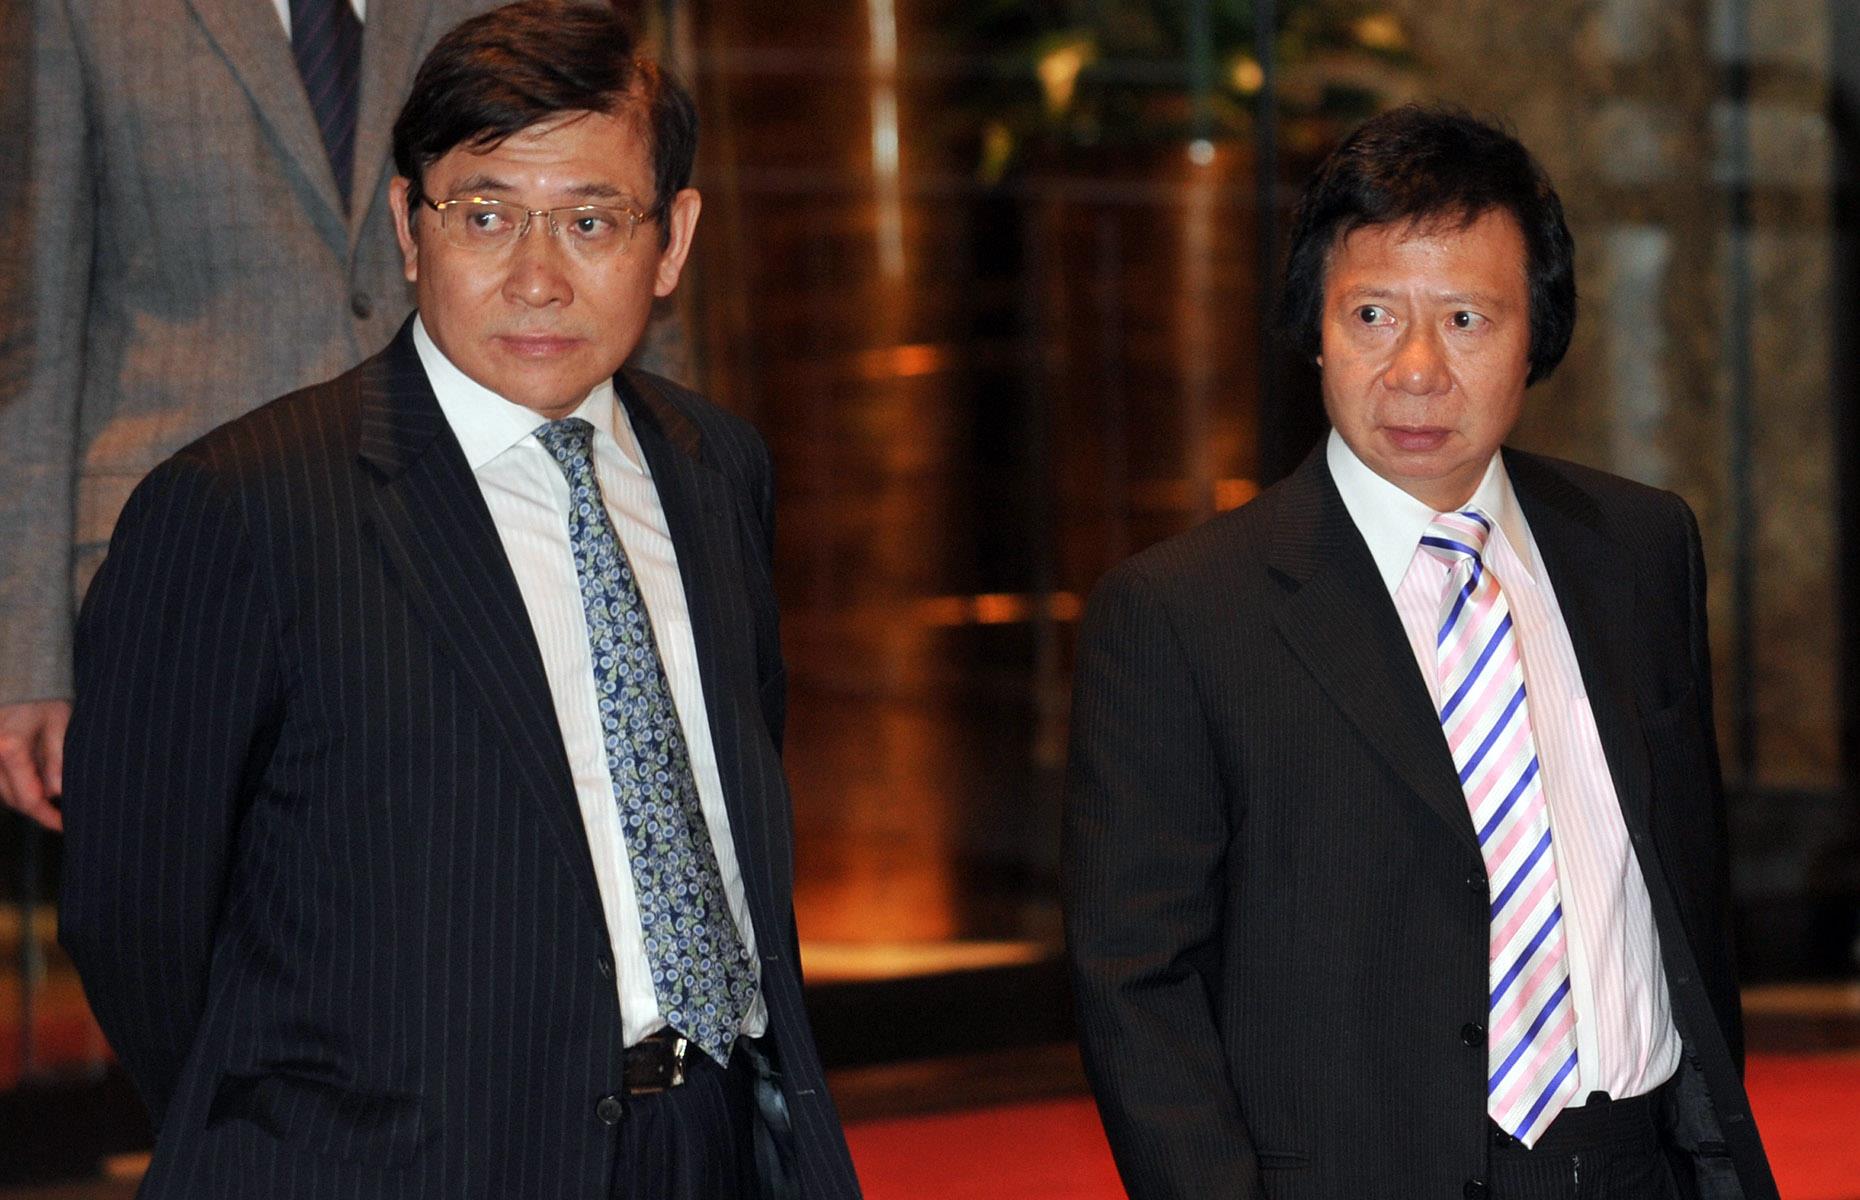 <p>Brothers Raymond (left) and Thomas Kwok are property magnates with an empire that includes real estate in Hong Kong and China. Their late<br> father Kwok Tak-Seng created Sun Hung Kai Properties in 1972.</p>  <p>Brother Walter, who died in October 2018, was at the helm from 1990 to 2008; then Thomas and Raymond assumed the running of the firm,<br> with their mother Kwong Siu-hing as key shareholder.</p>  <p>However, Thomas was jailed for five years in 2014 on corruption charges, being released in early 2019. The family's net worth has fallen since<br> then, but still stands at a very healthy $24.7 billion.</p>